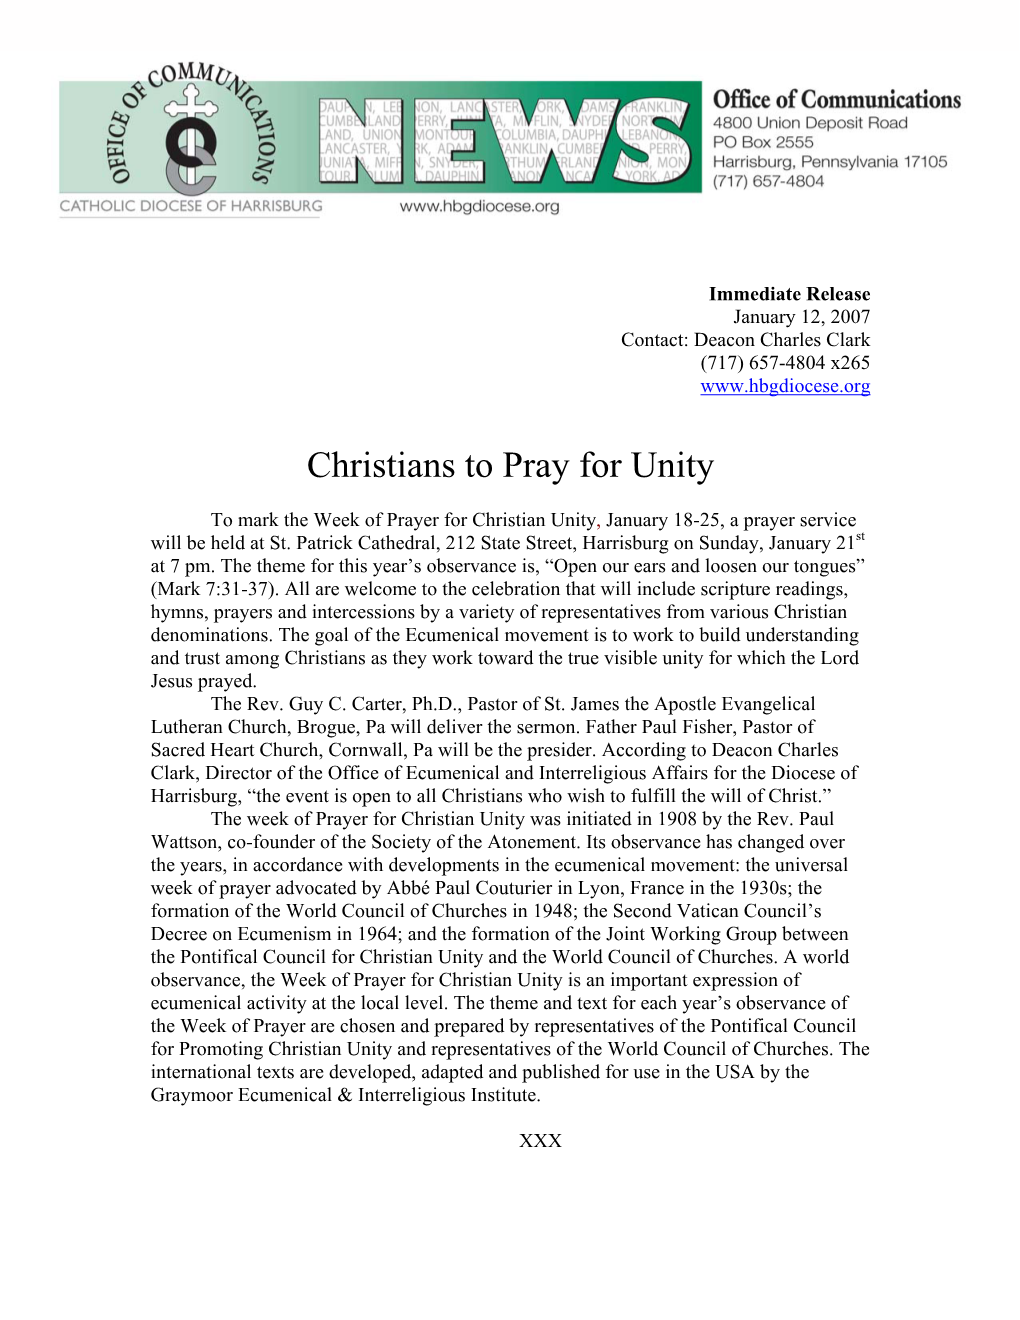 Christians to Pray for Unity